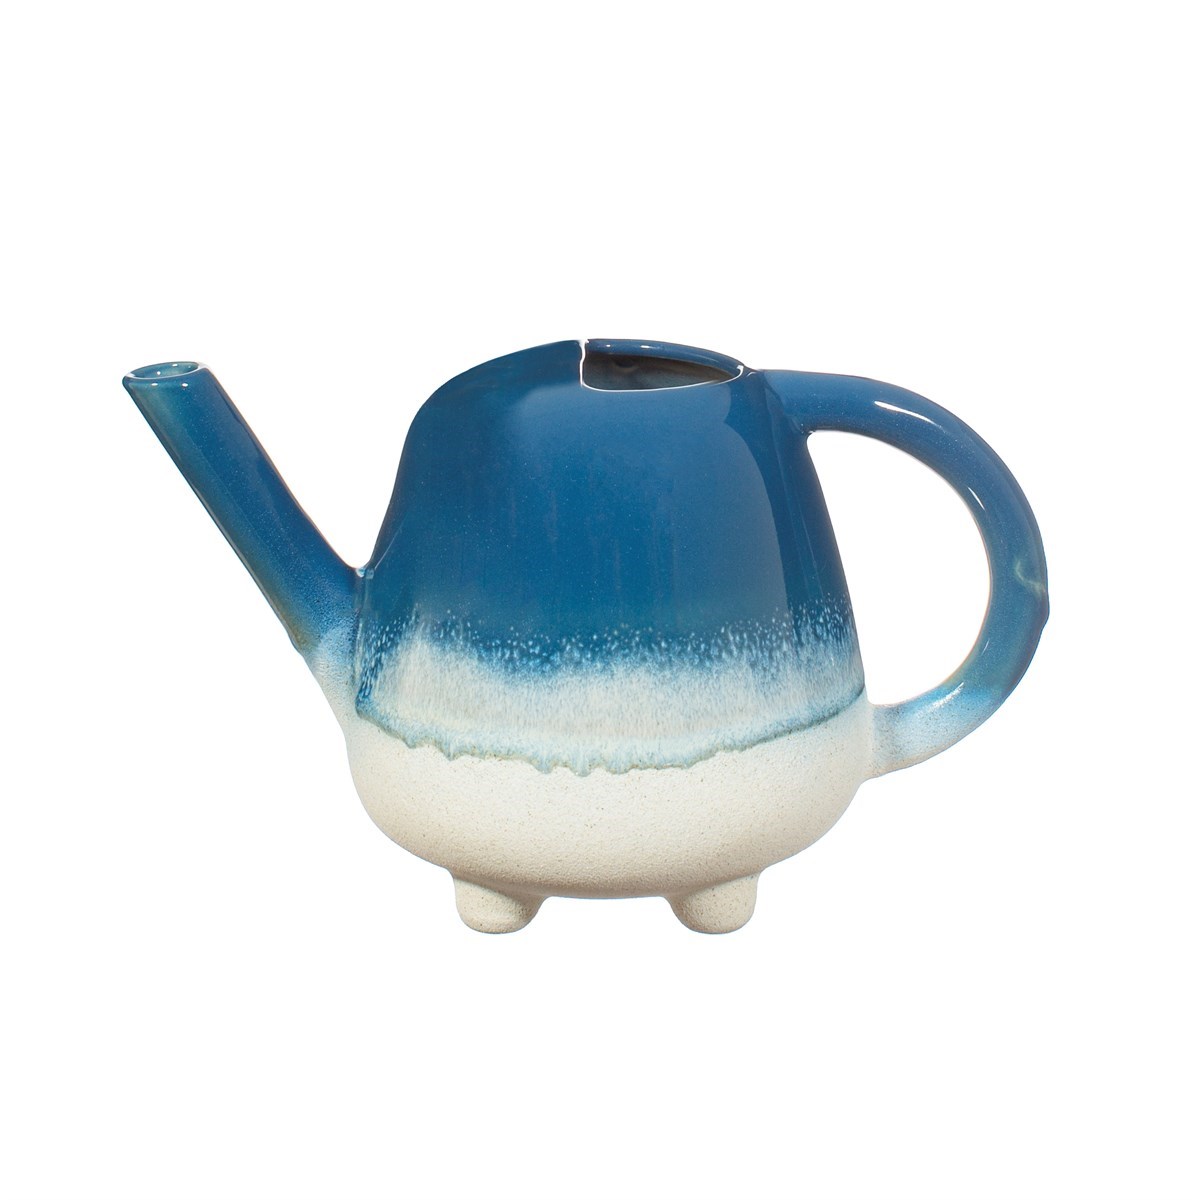 Mojave Blue watering can